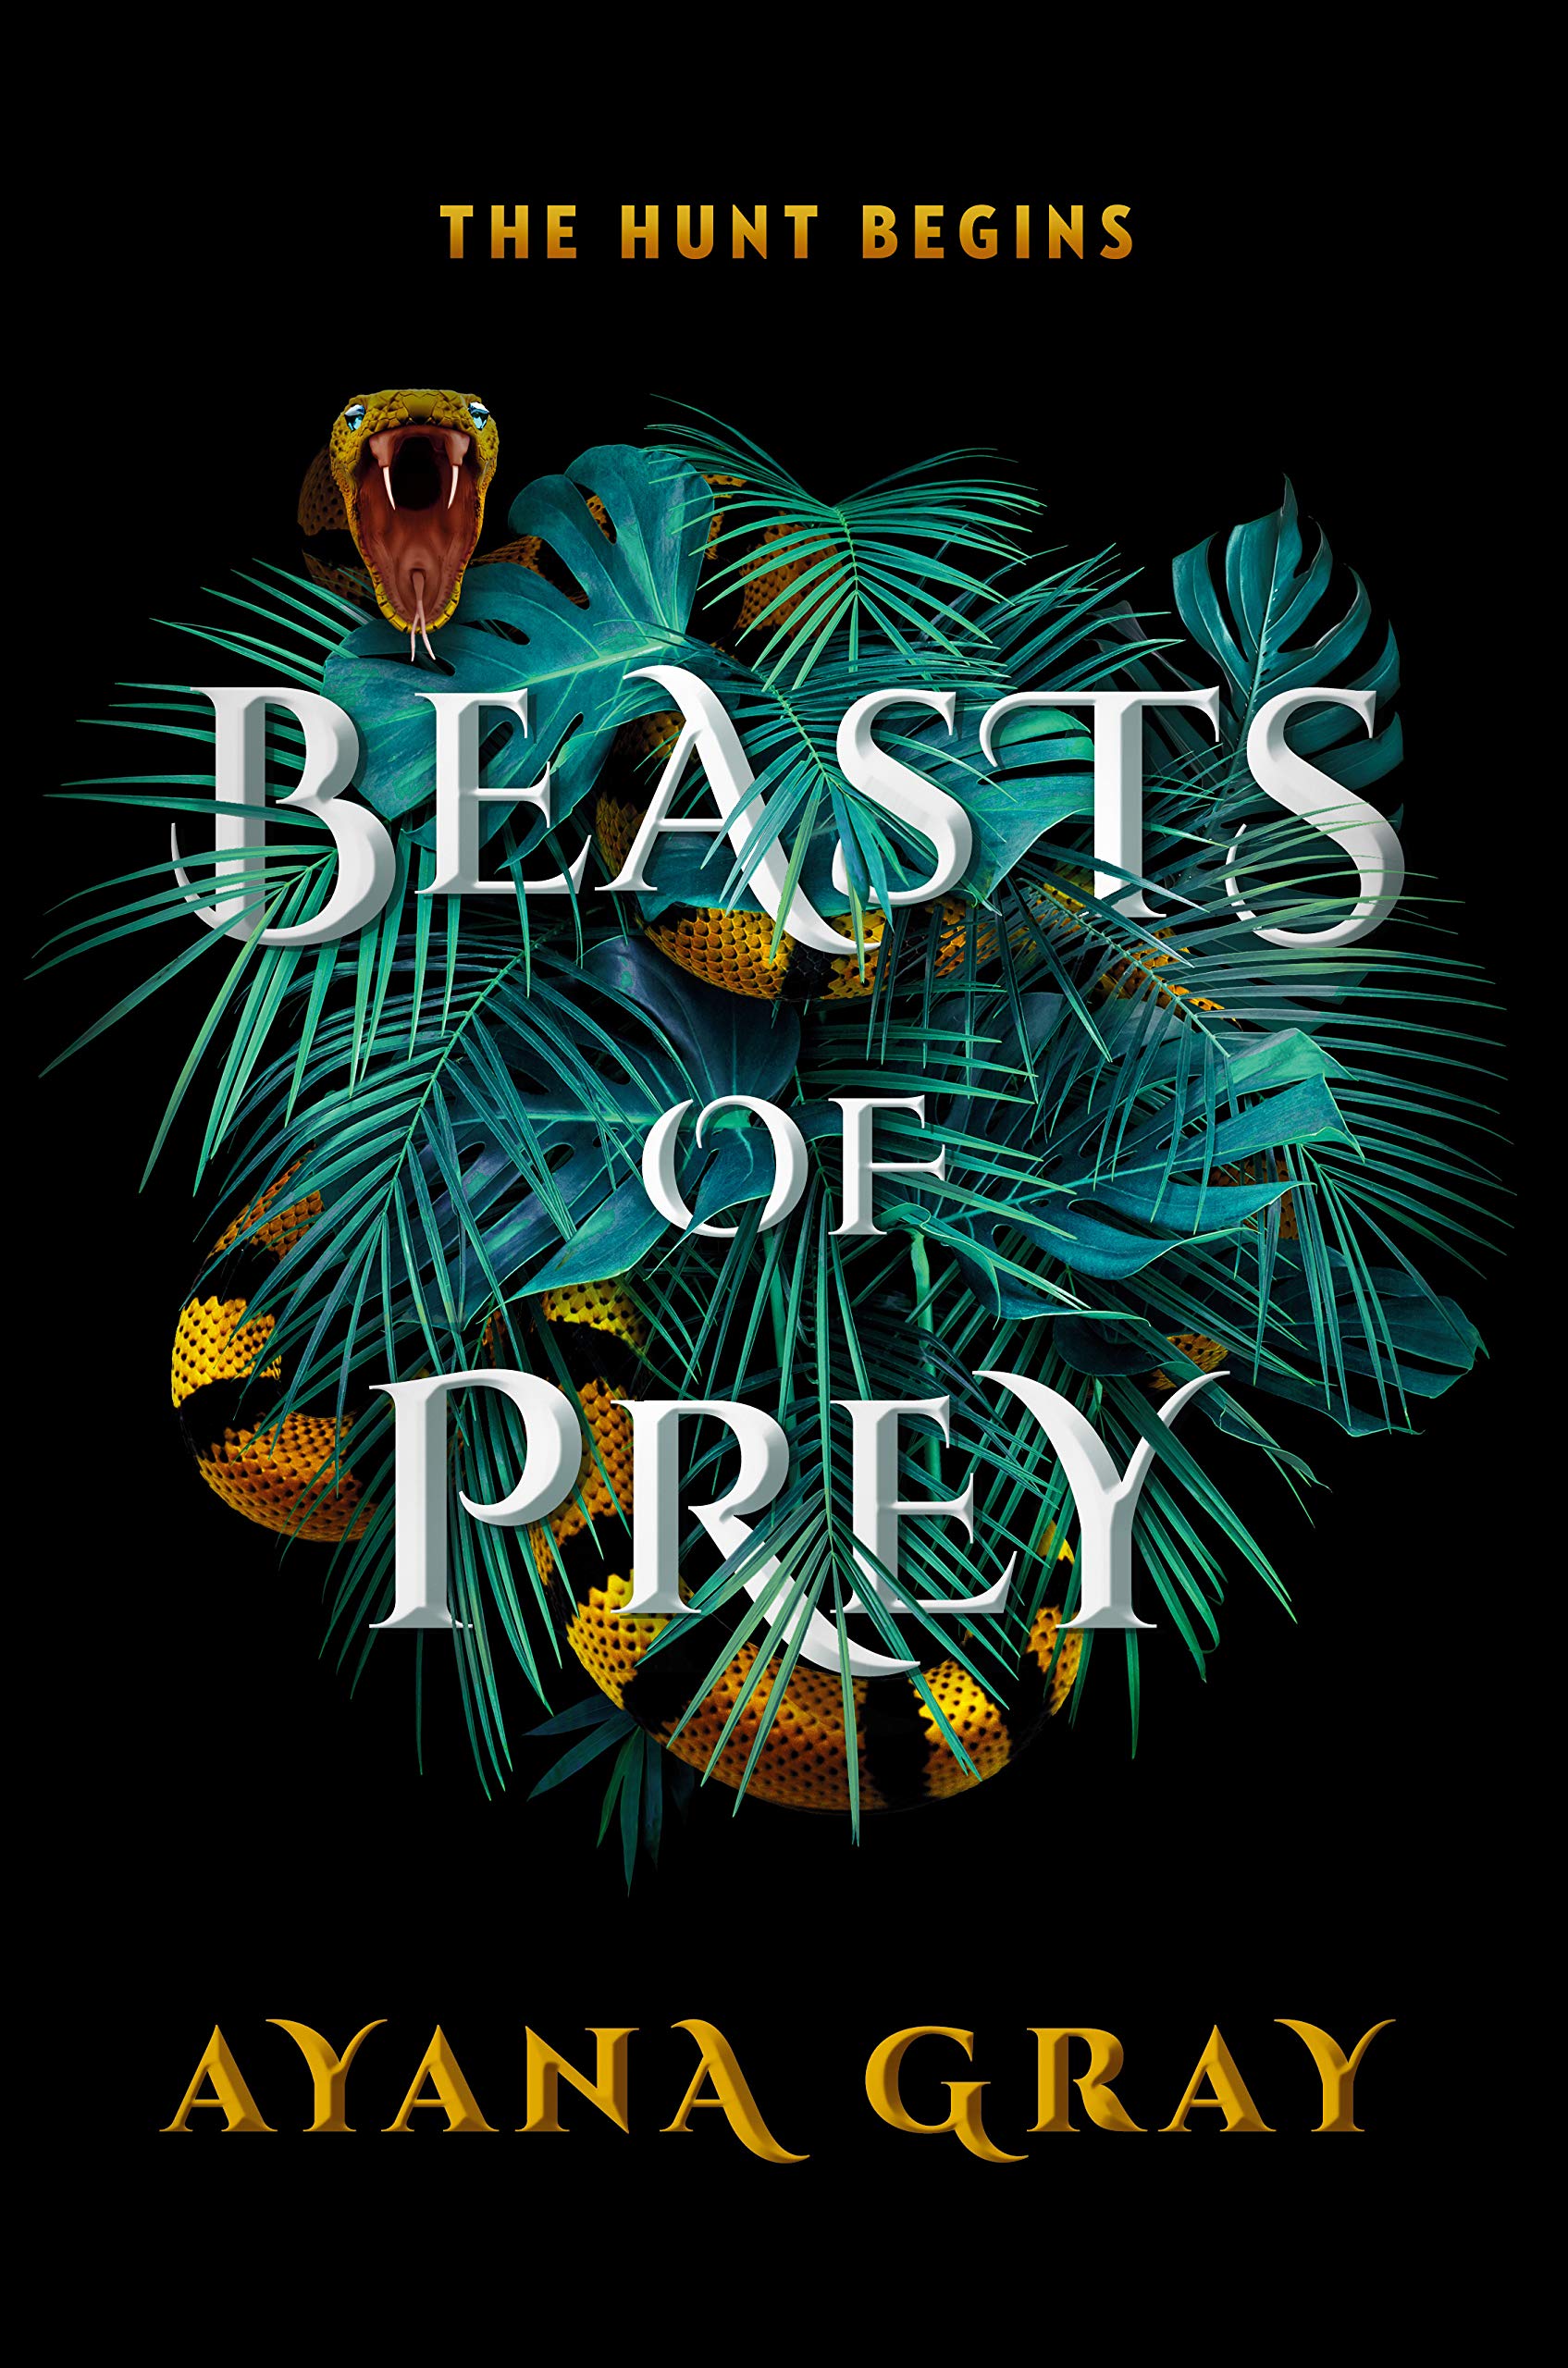 Beasts of Prey Hardcover by Ayana Gray